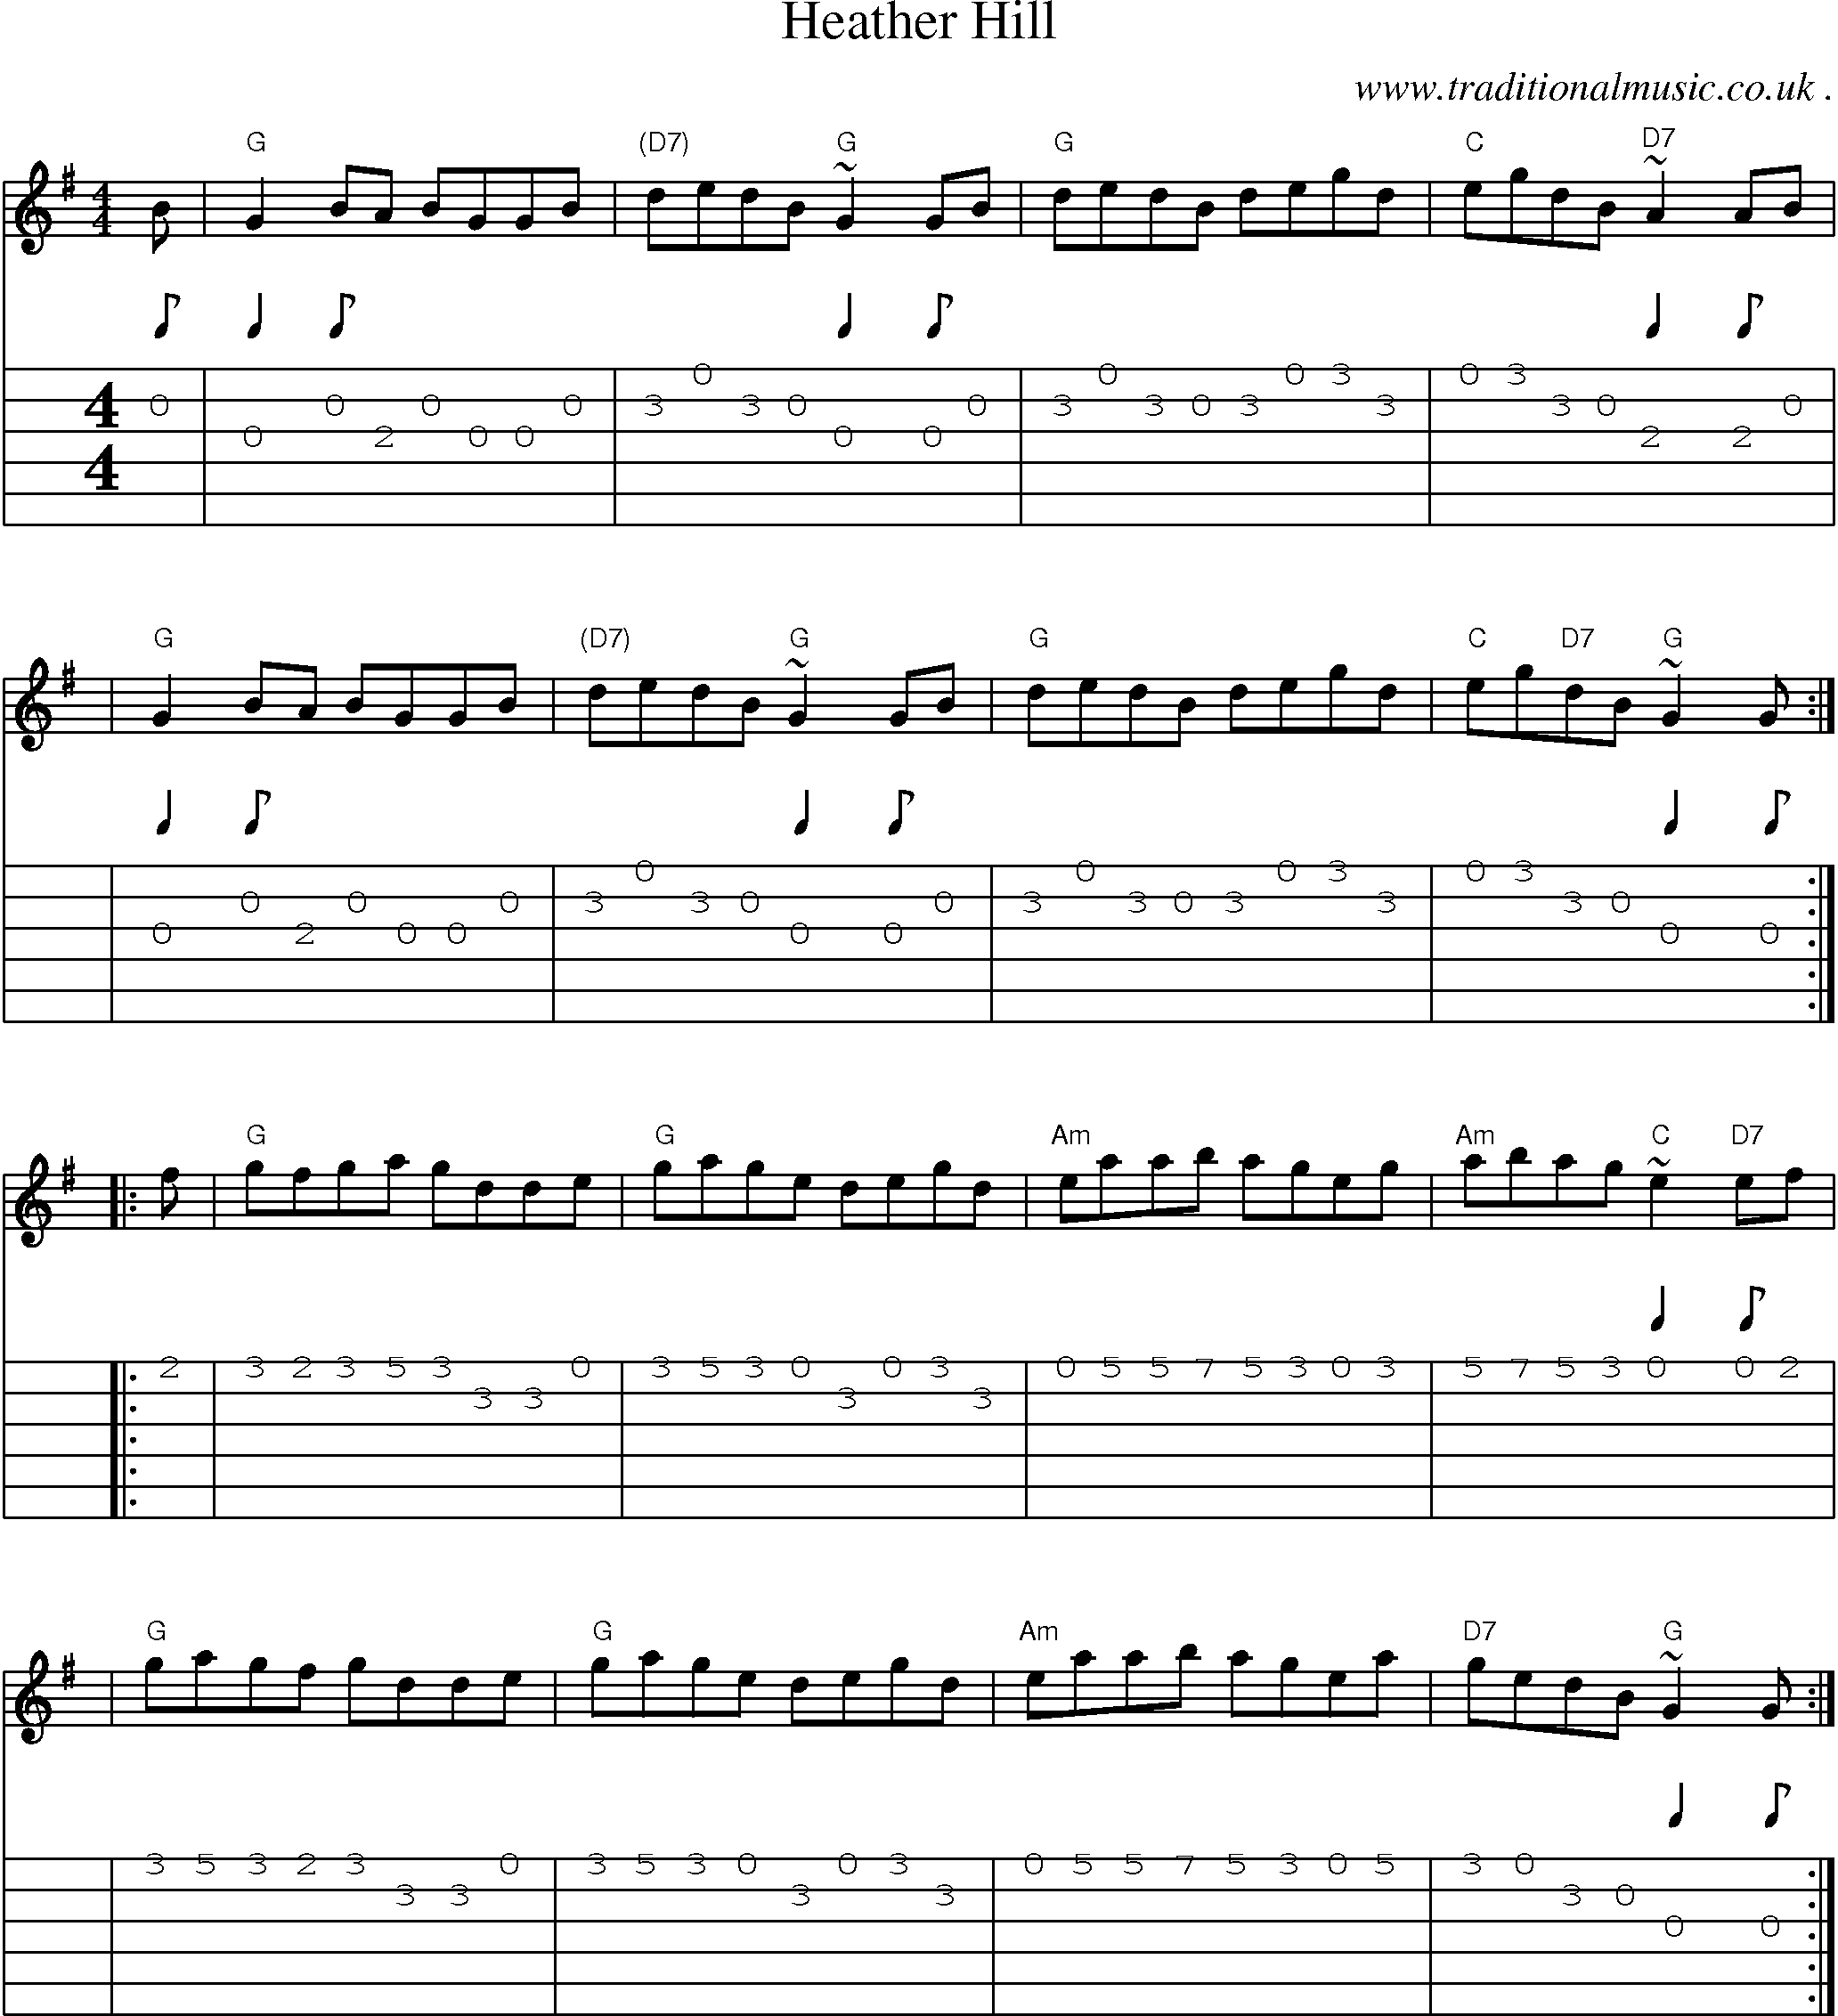 Sheet-music  score, Chords and Guitar Tabs for Heather Hill